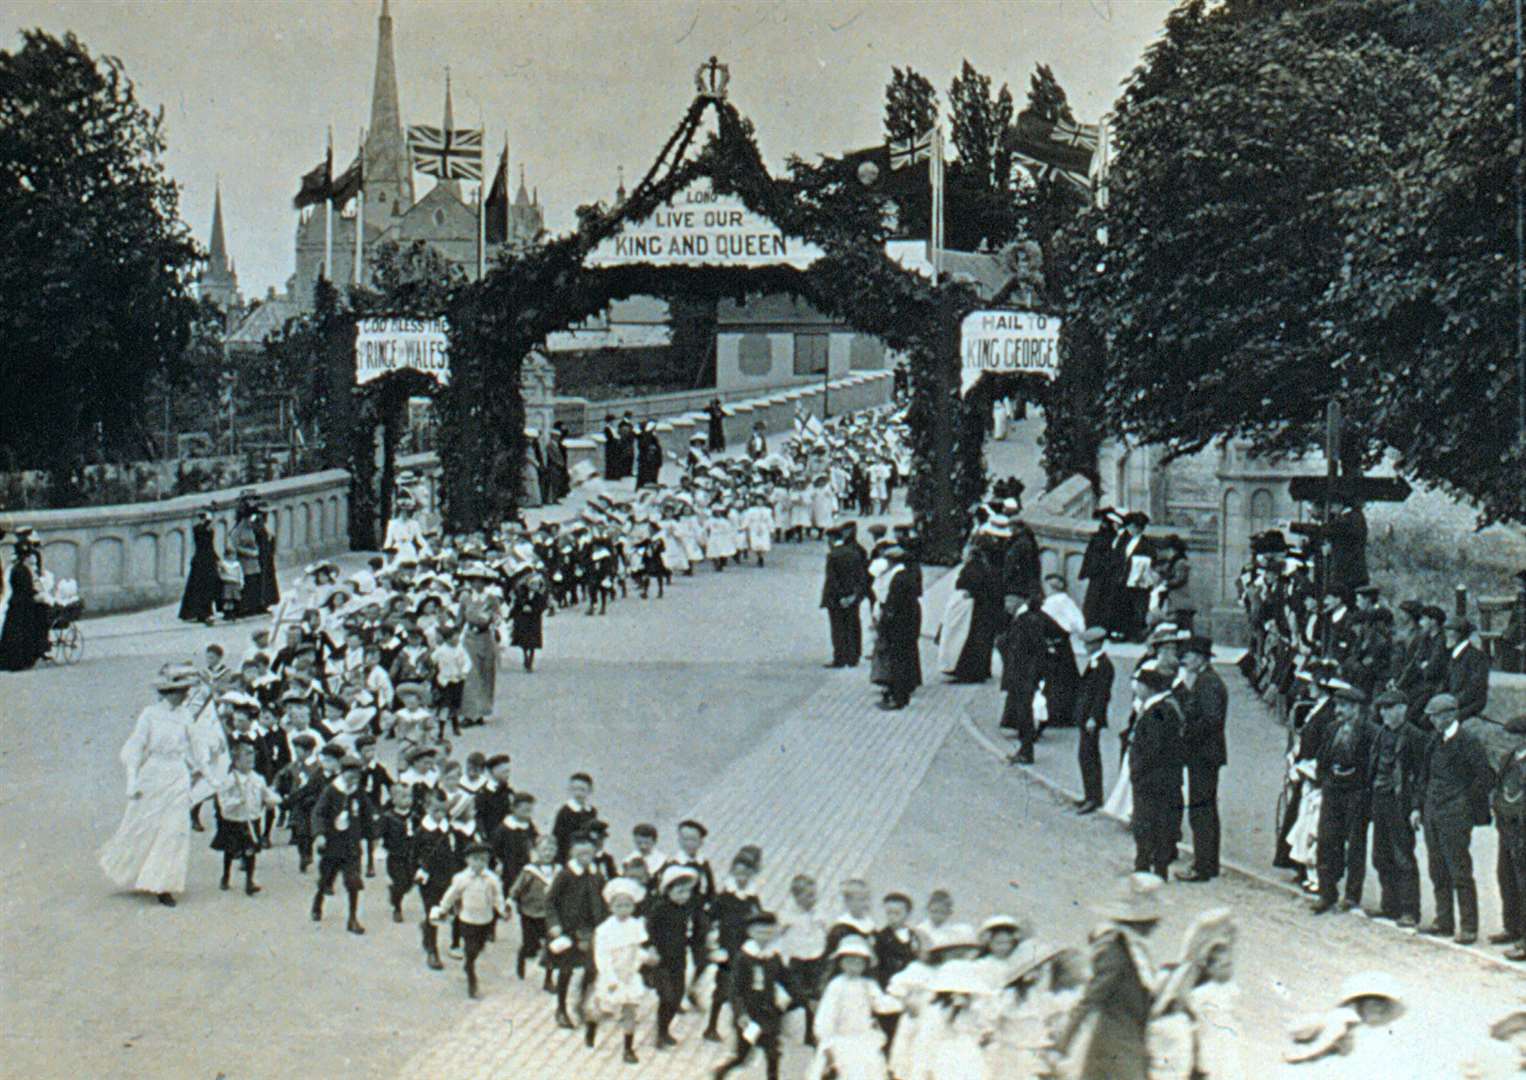 A parade over Bridge Street to Roysvale Park for the Coronation of King George V and Queen Mary on June 22, 1911.